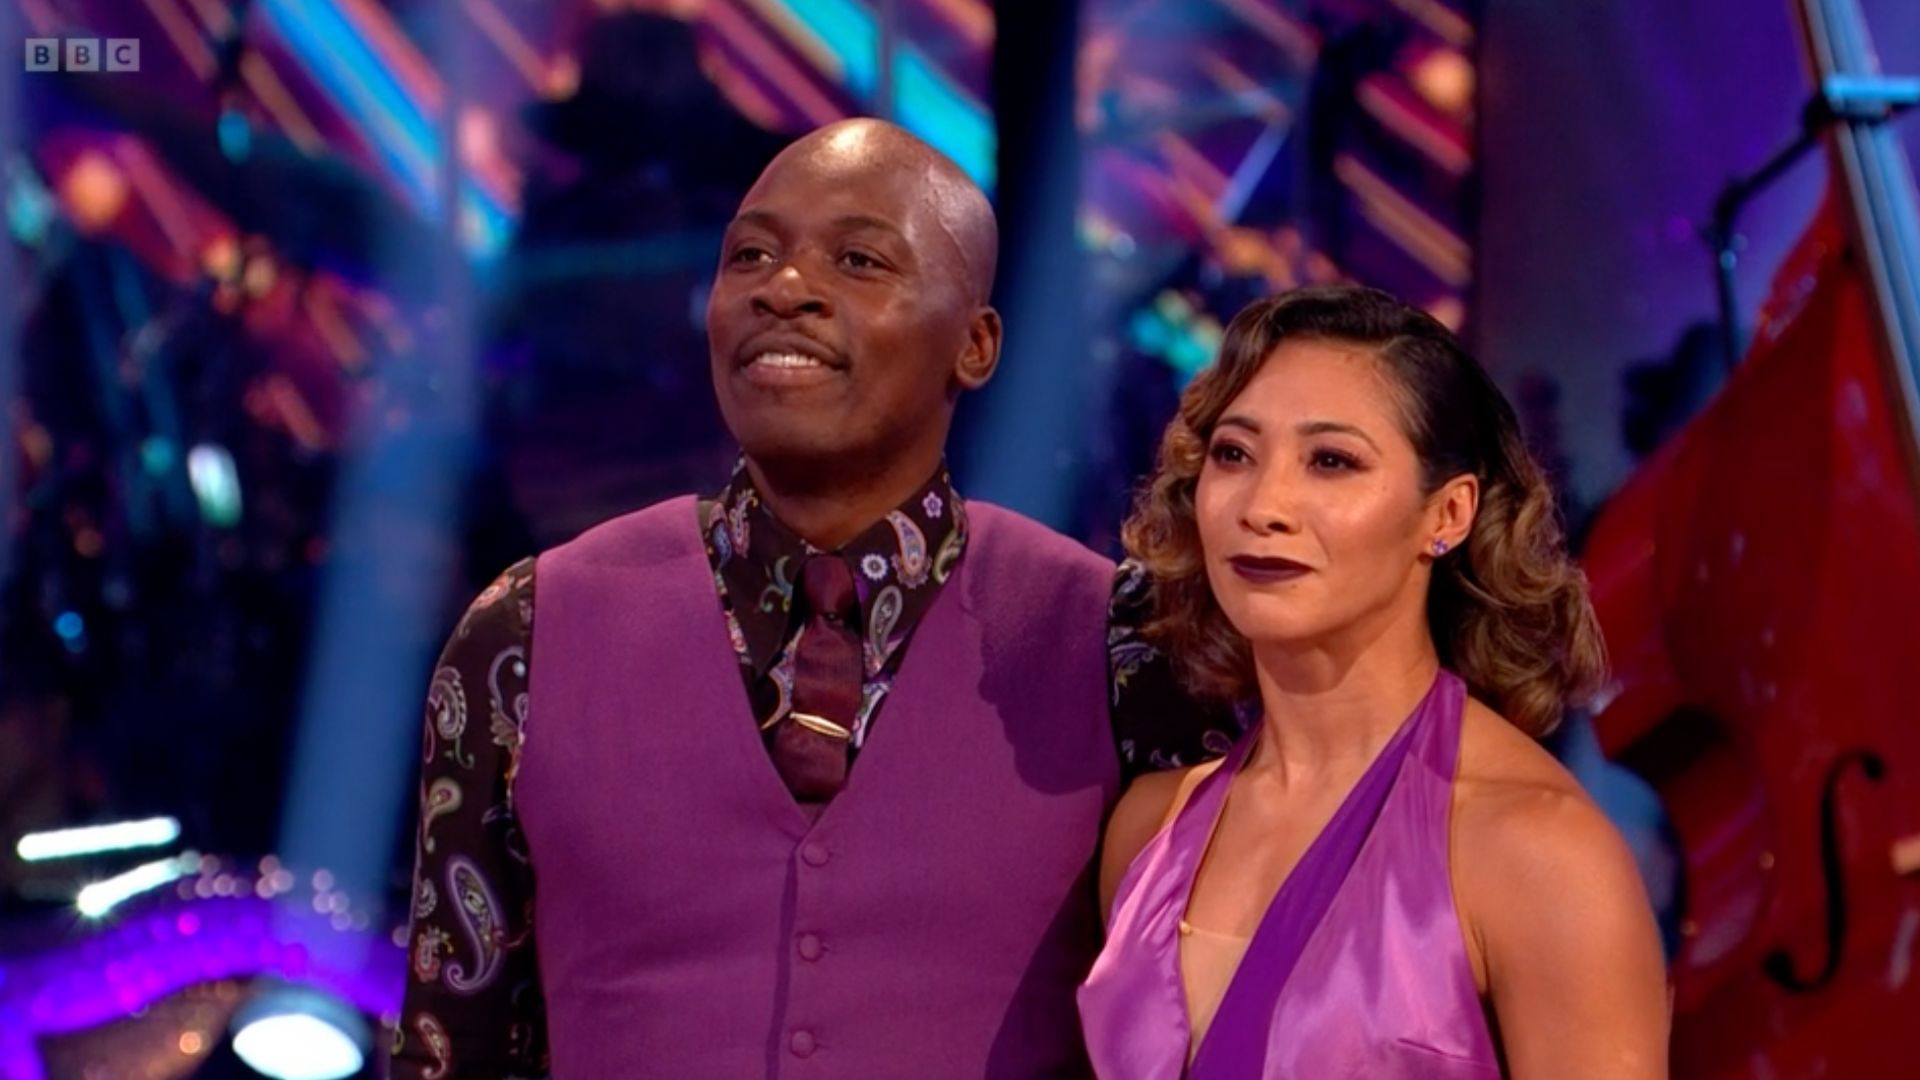 Karen Hauer looked upset following the Strictly routine